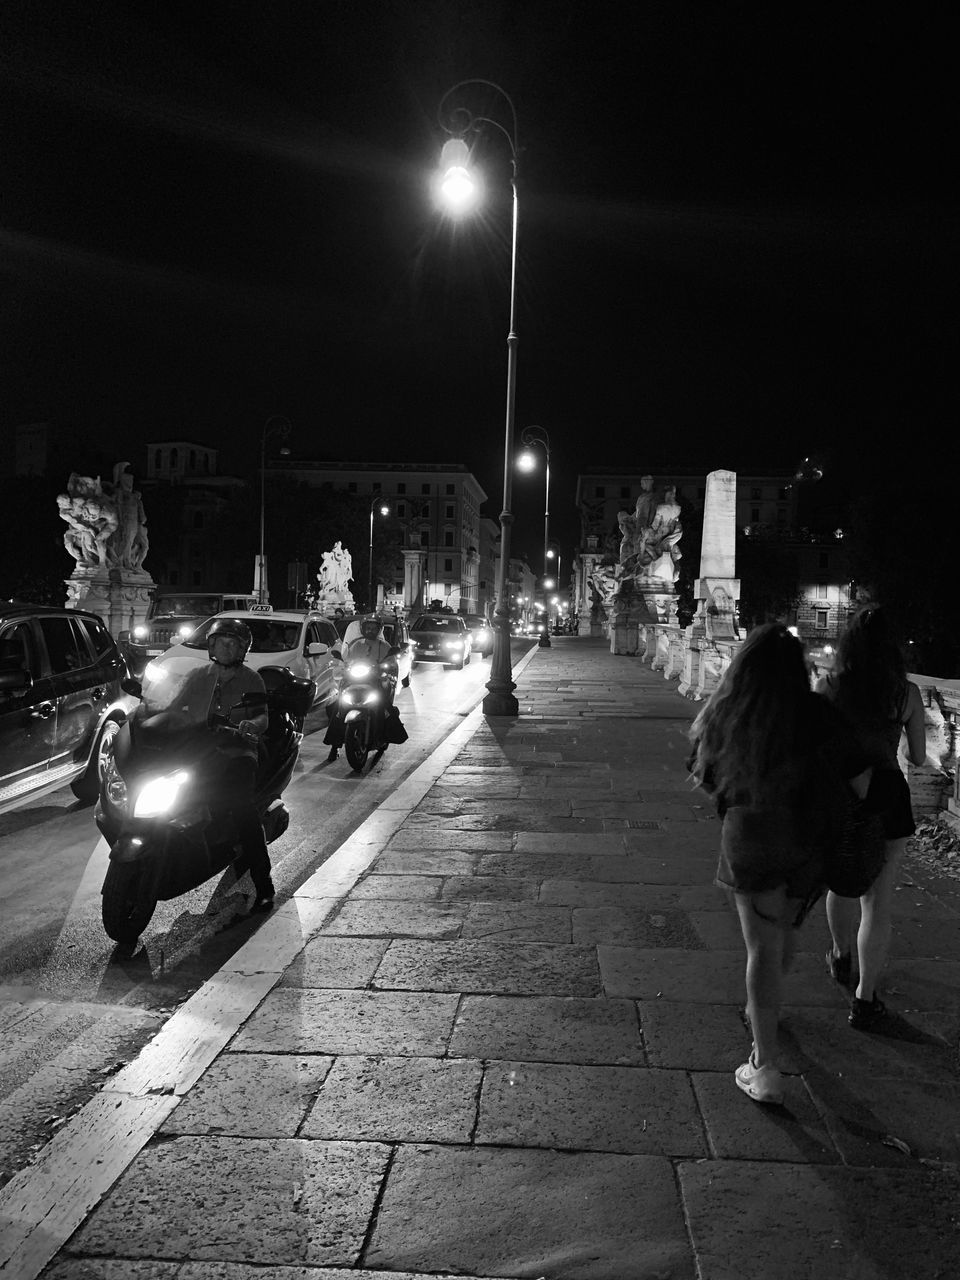 PEOPLE ON STREET IN CITY AT NIGHT